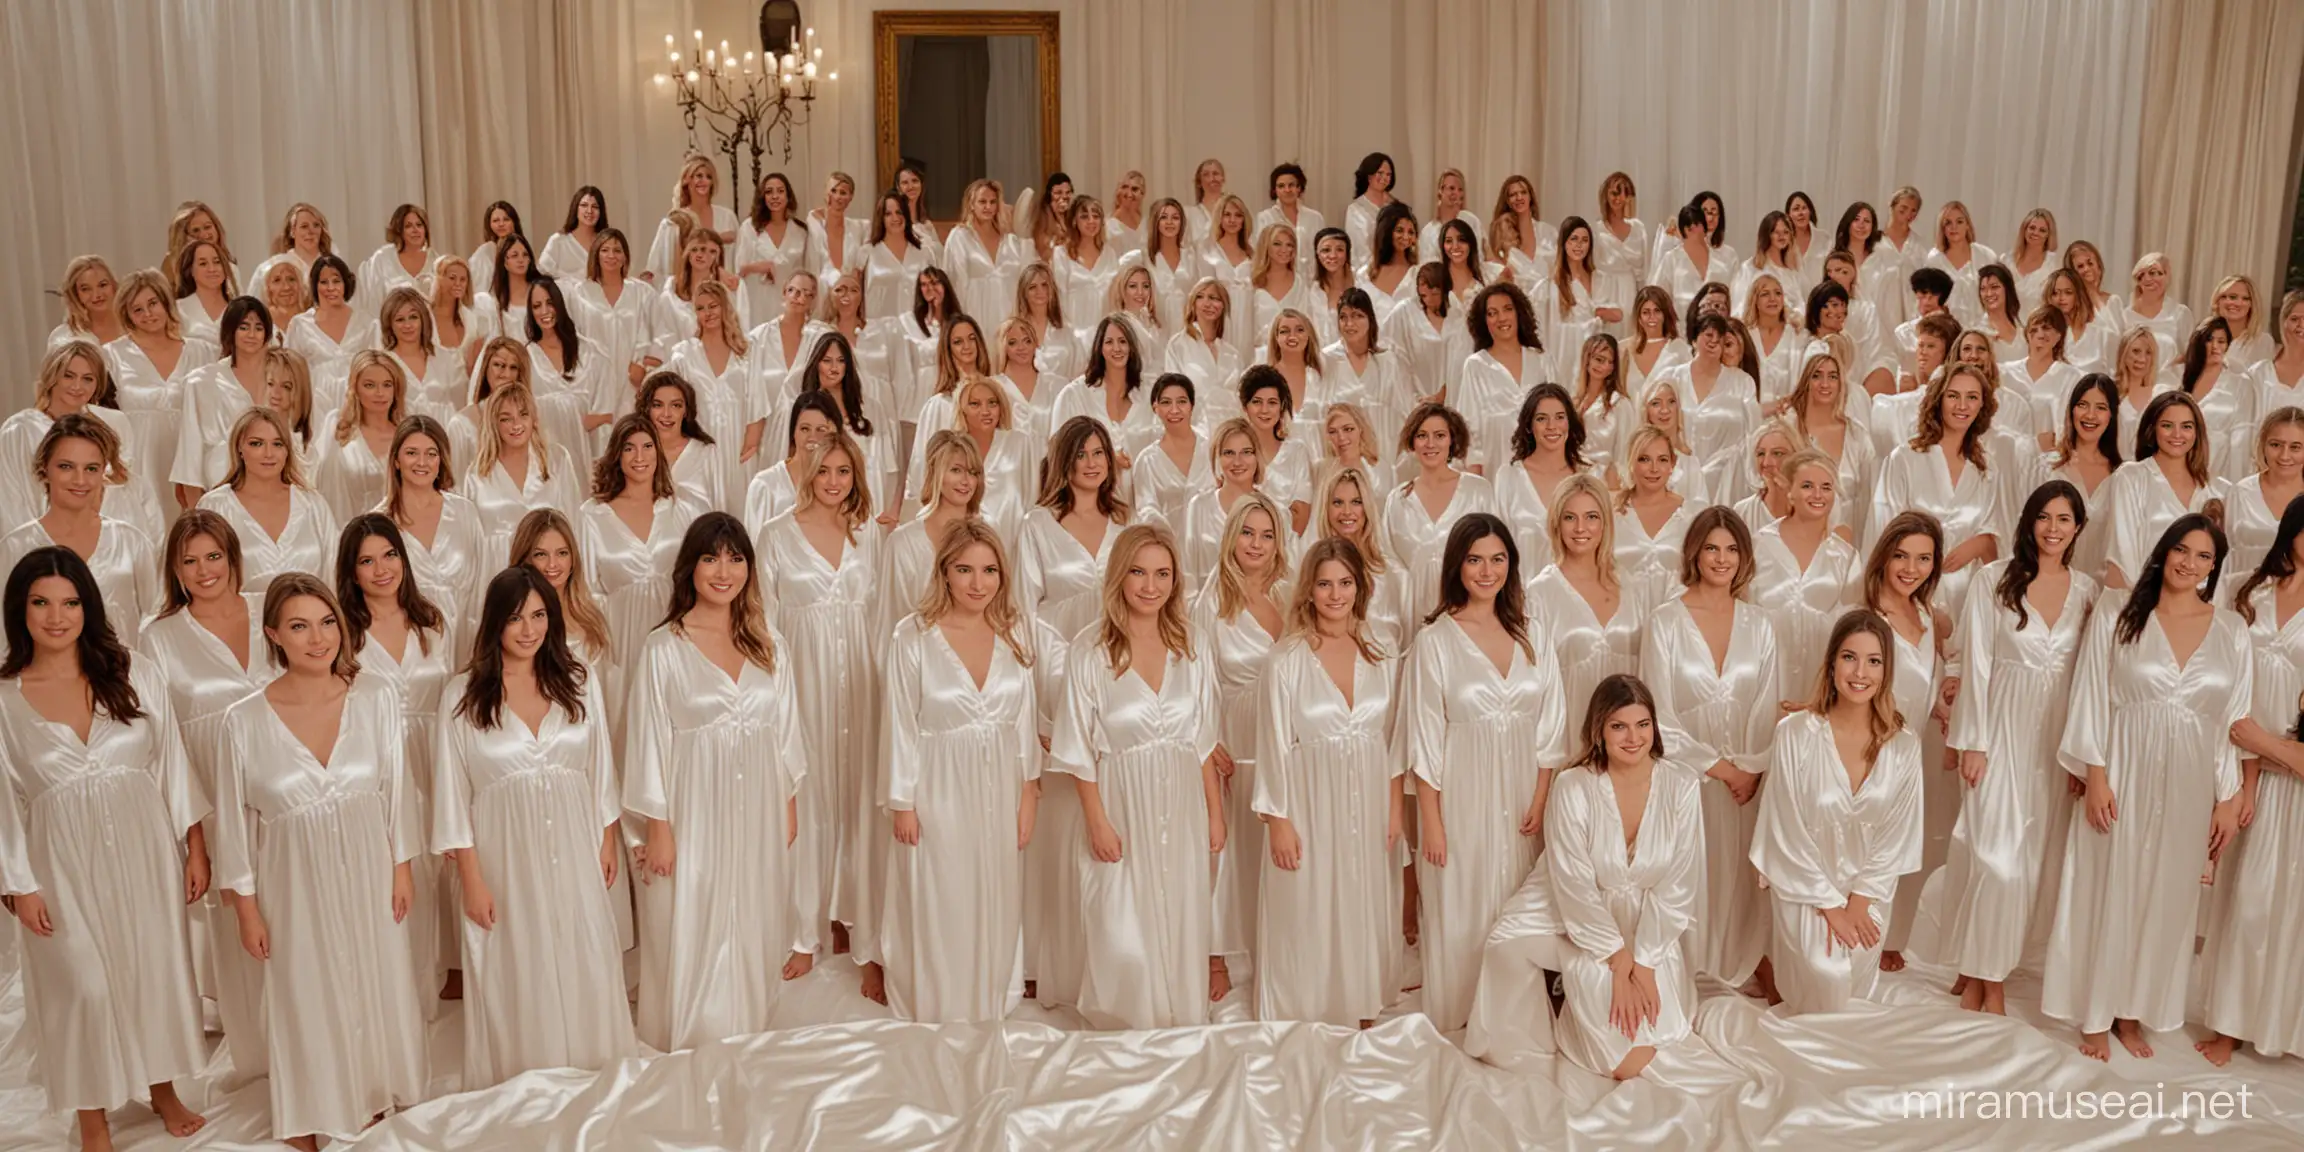 30 women in creamy white satin nightgowns stand in 10 rows on a huge satin bed look you